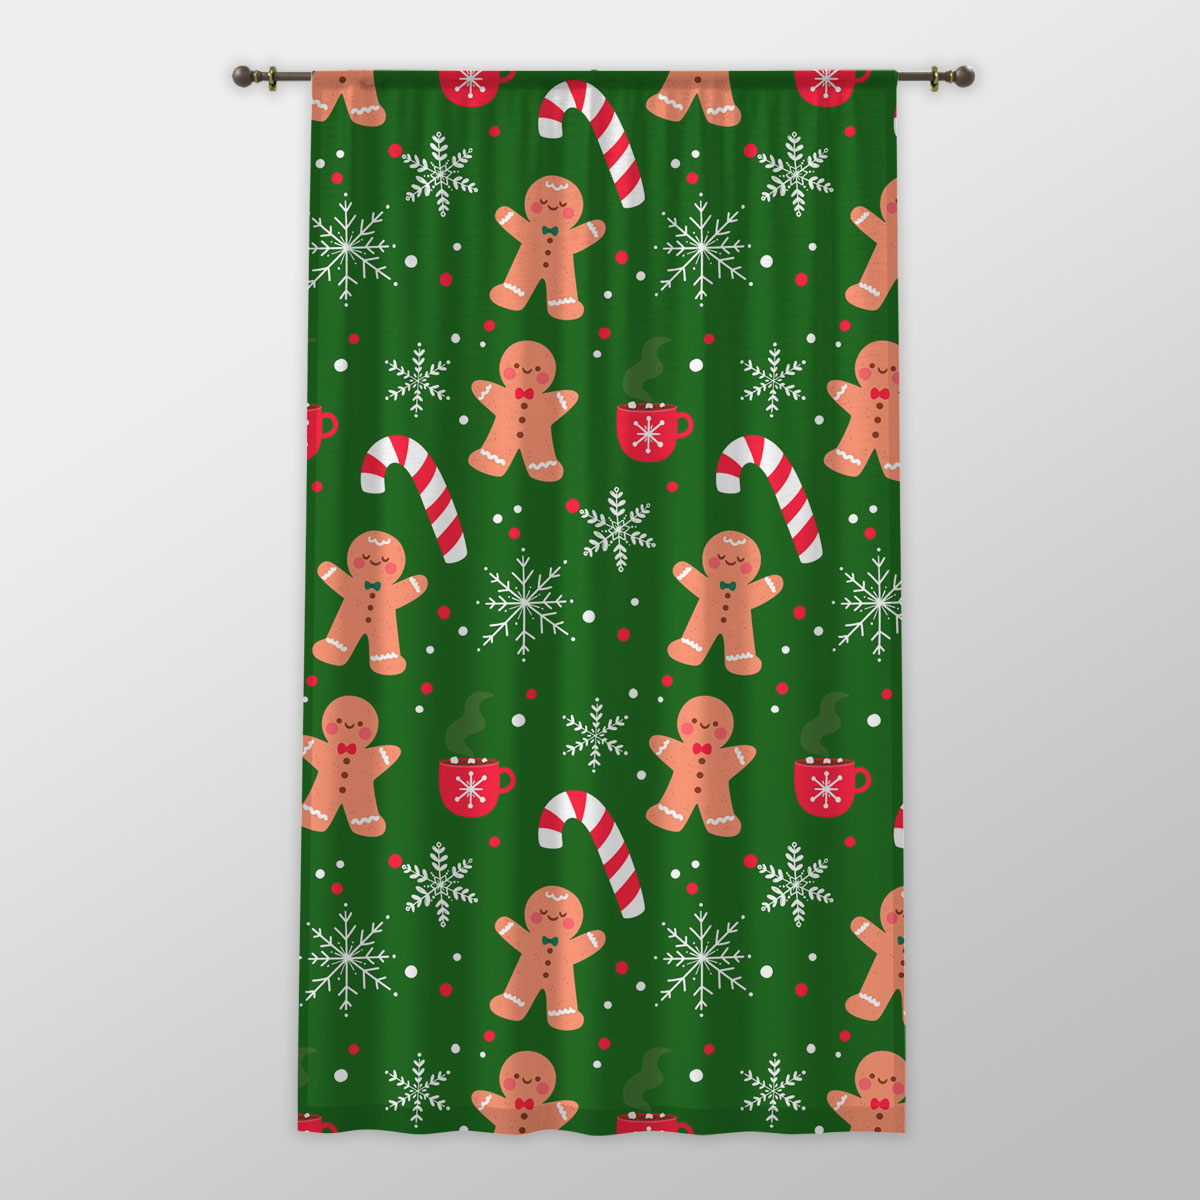 Red Green And White Gingerbread Man, Candy Cane With Snowflake One-side Printed Window Curtain